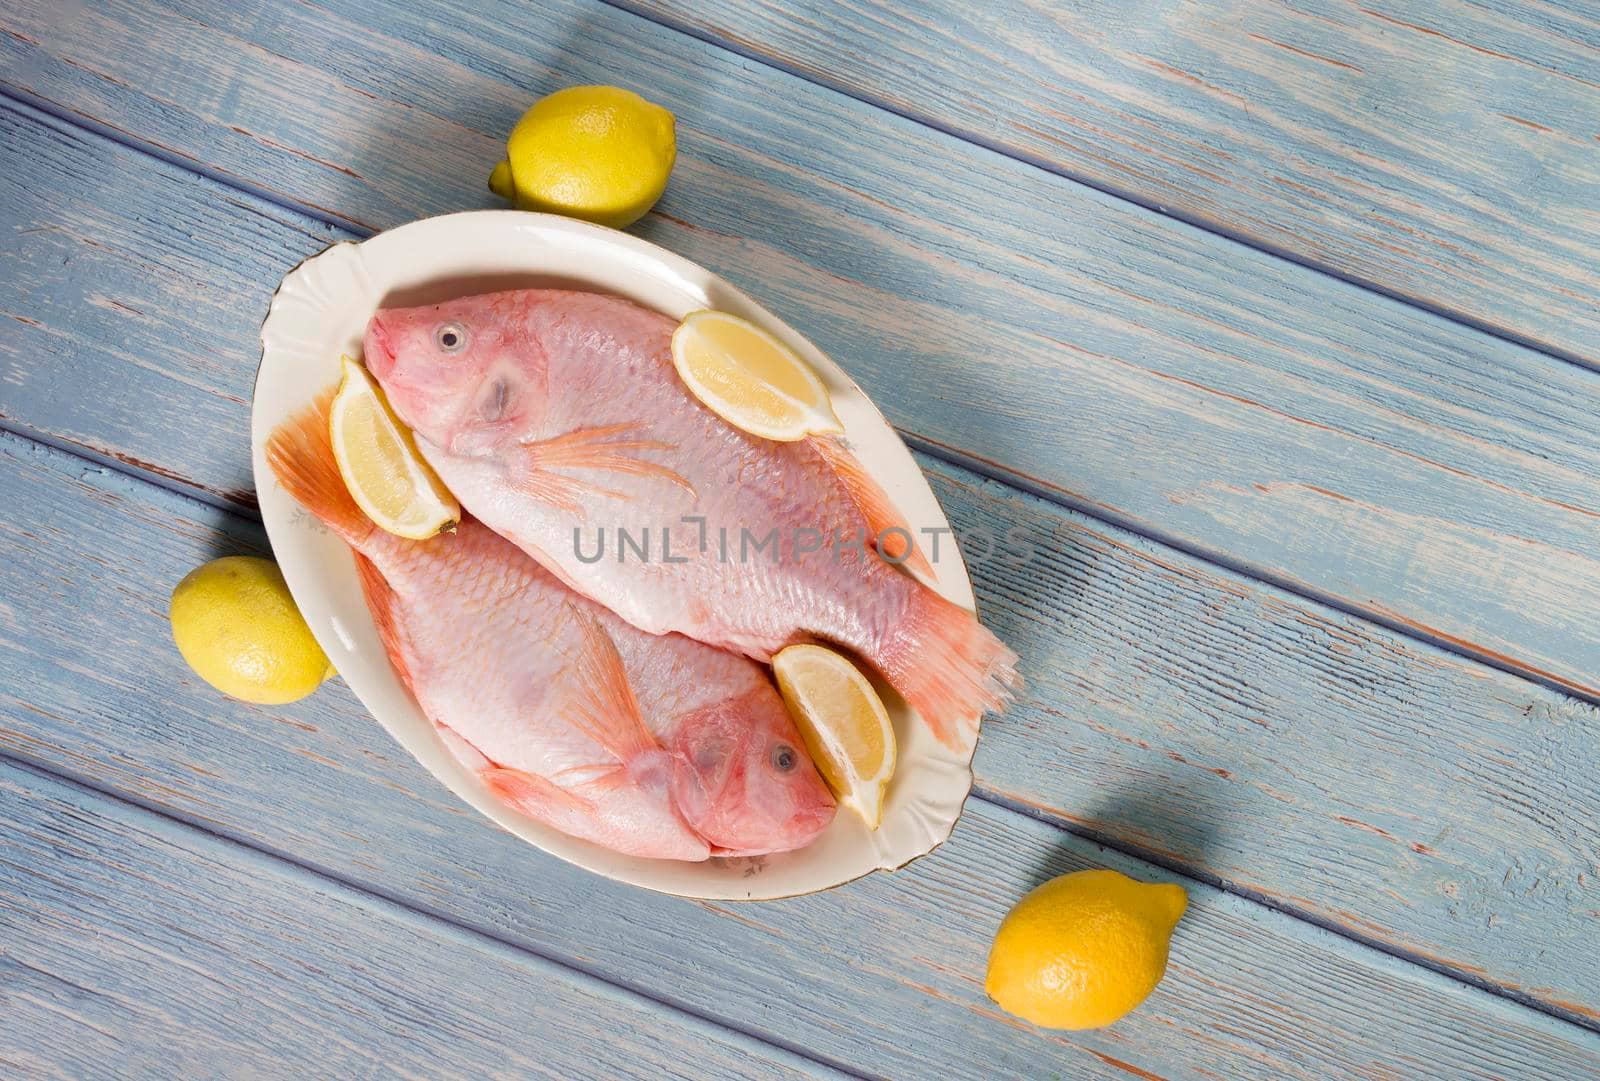 raw fresh pink tilapia fish lies on a platter surrounded by yellow lemons by KaterinaDalemans